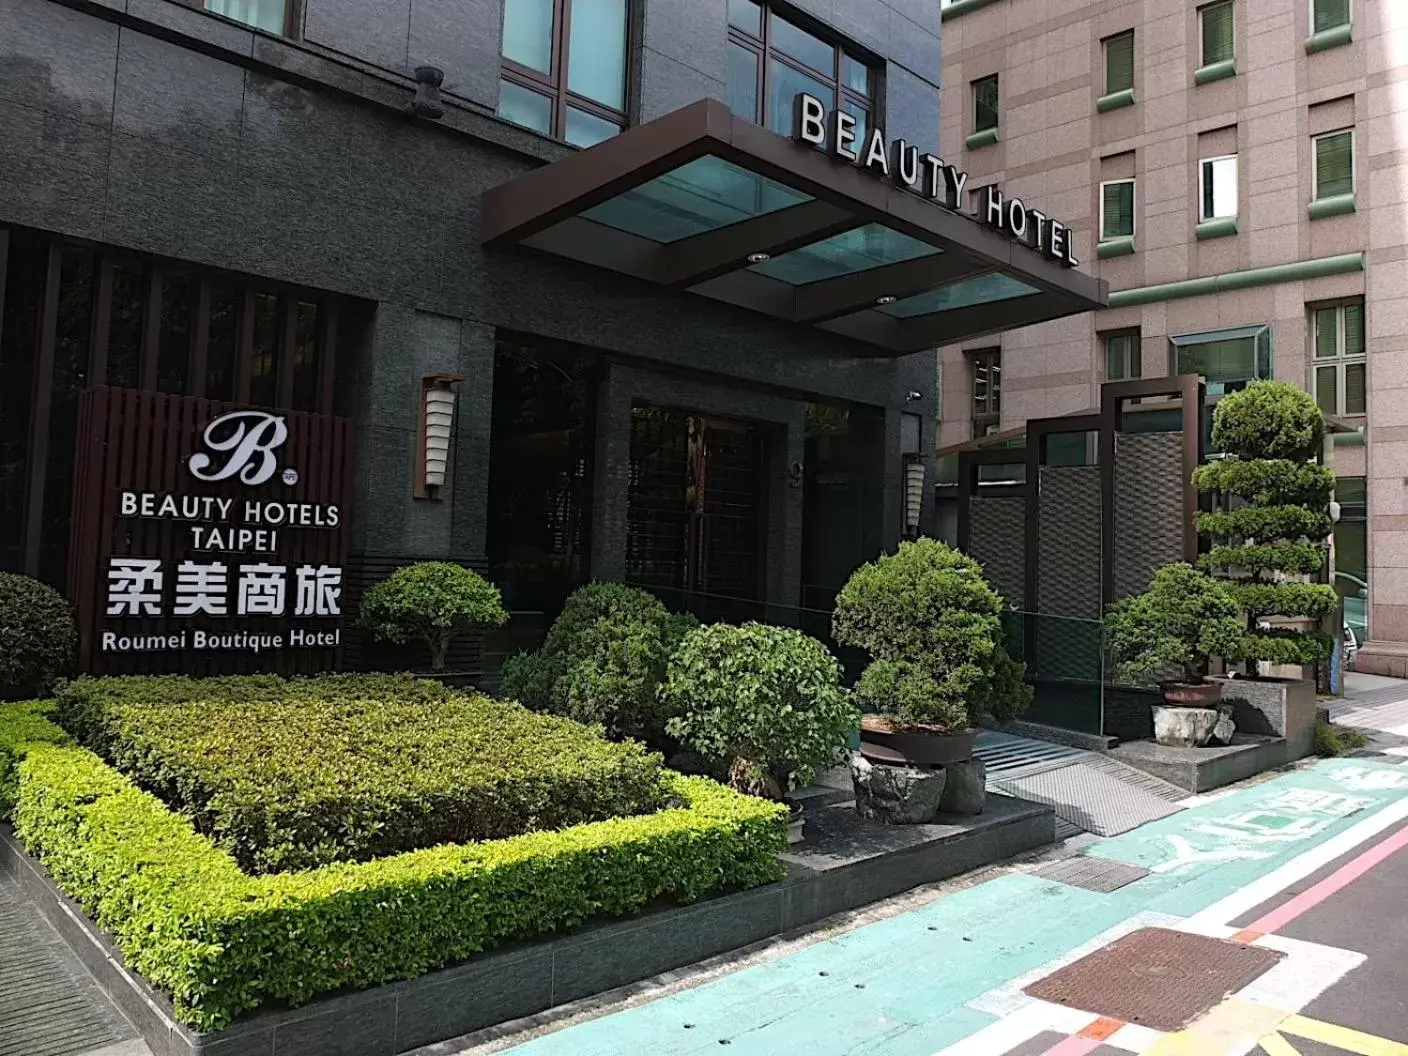 Property building in Beauty Hotels - Roumei Boutique